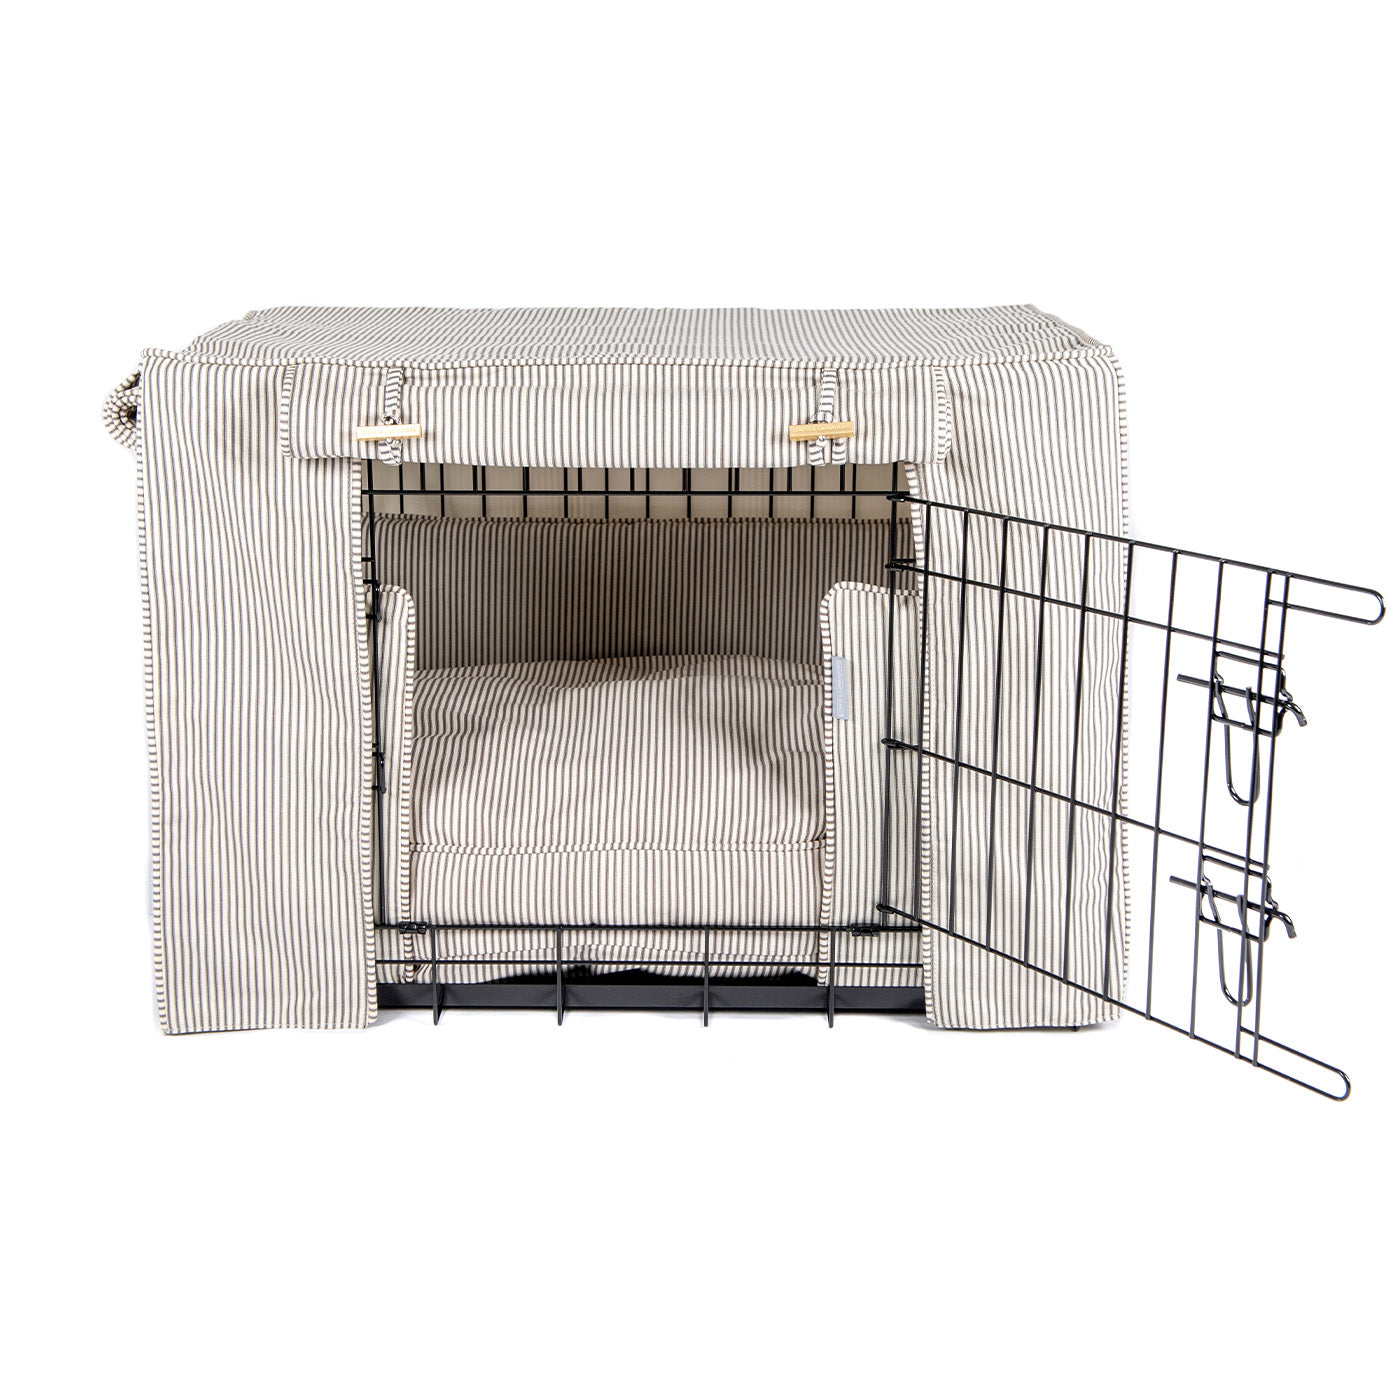 Luxury Black Dog Cage Set With Cushion, Bumper and Cage Cover, In Regency Stripe Oil Cloth. The Perfect Dog Cage For The Ultimate Naptime, Available Now at Lords & Labradors US